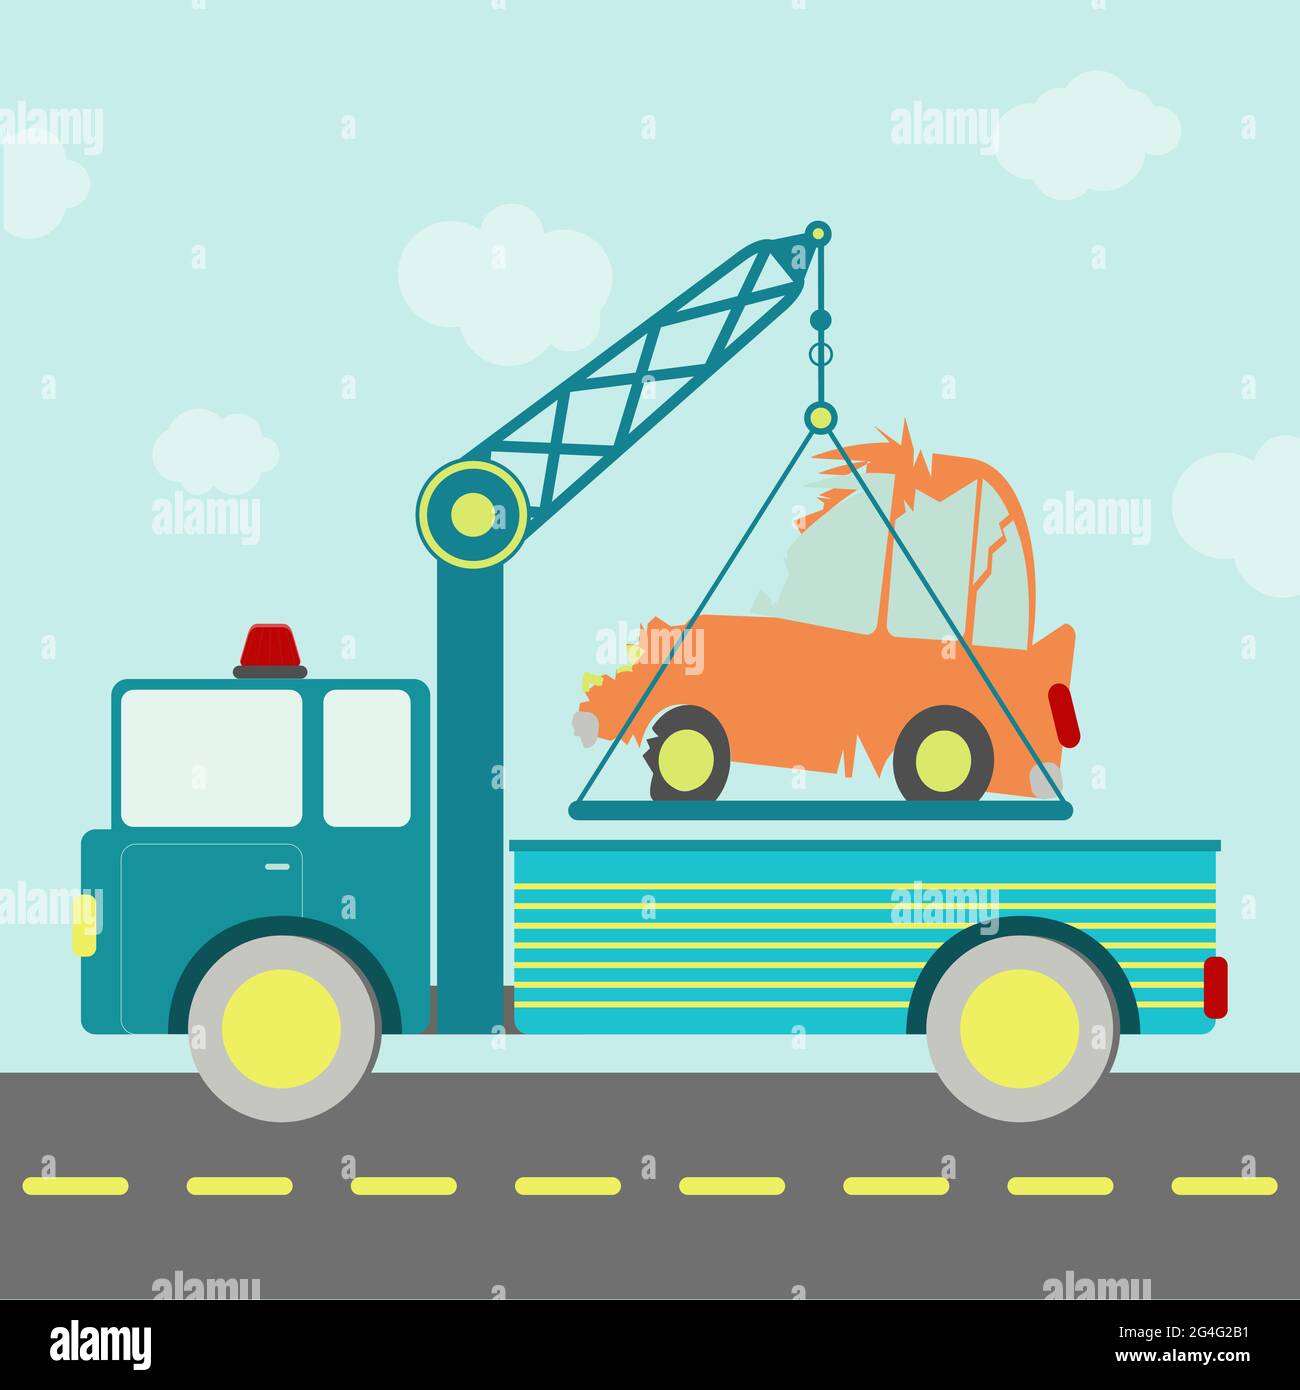 Tow truck carrying a crashed car on the road. Blue sky in the background. Stock Vector